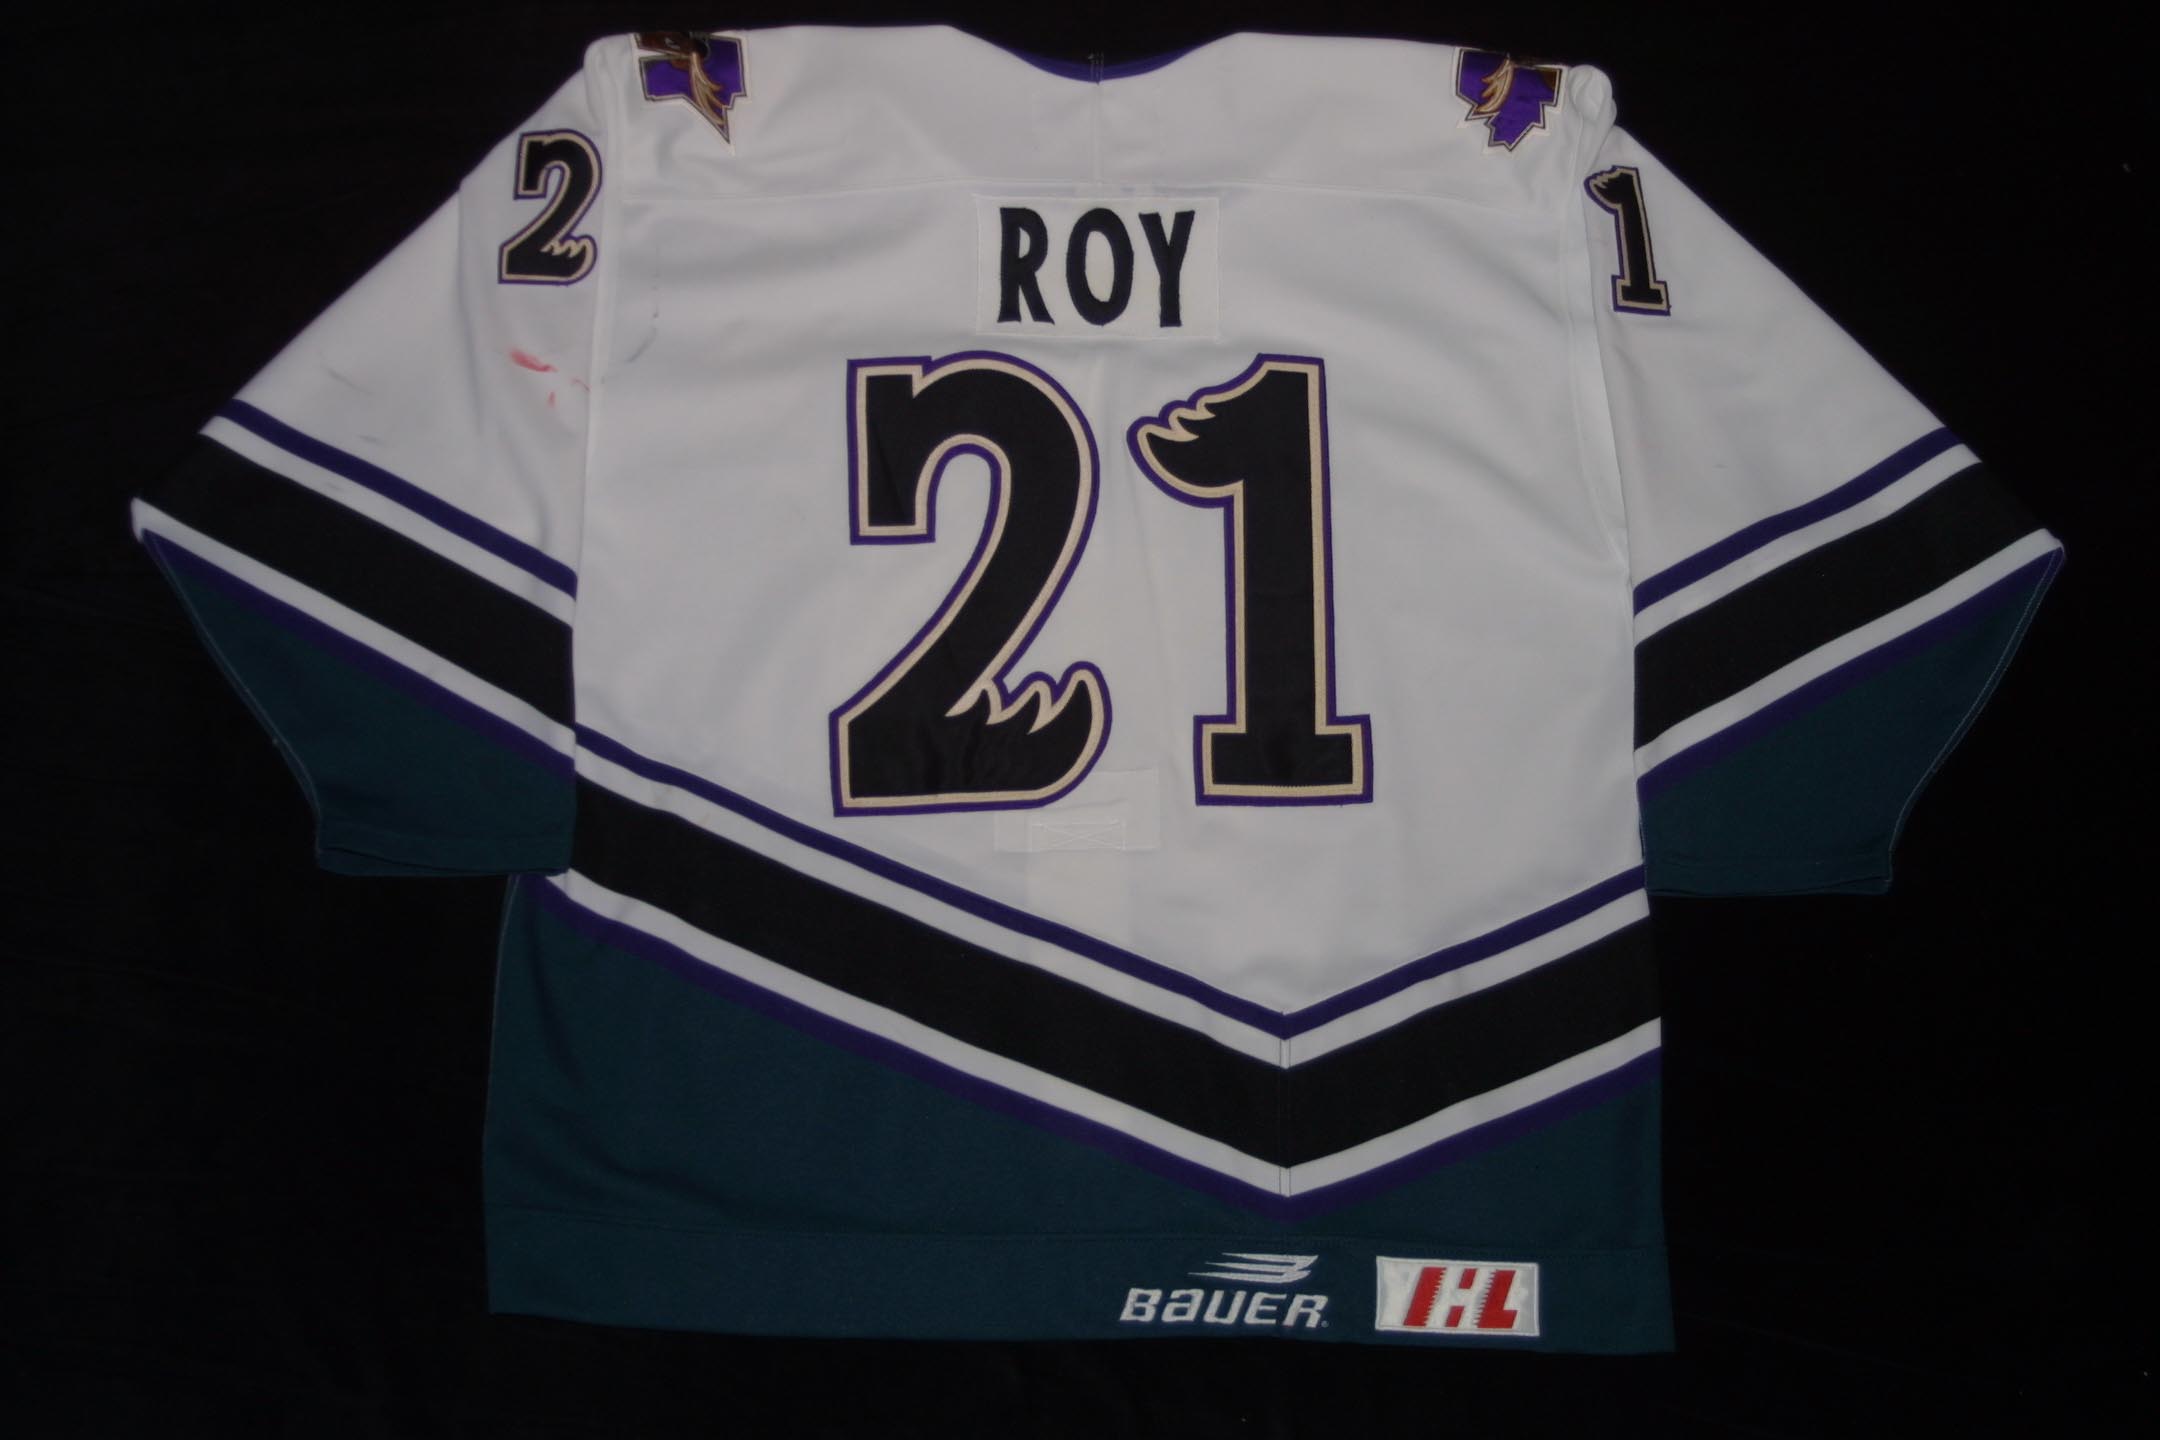 The Jimmy Roy Collection at Johnson's Jerseys